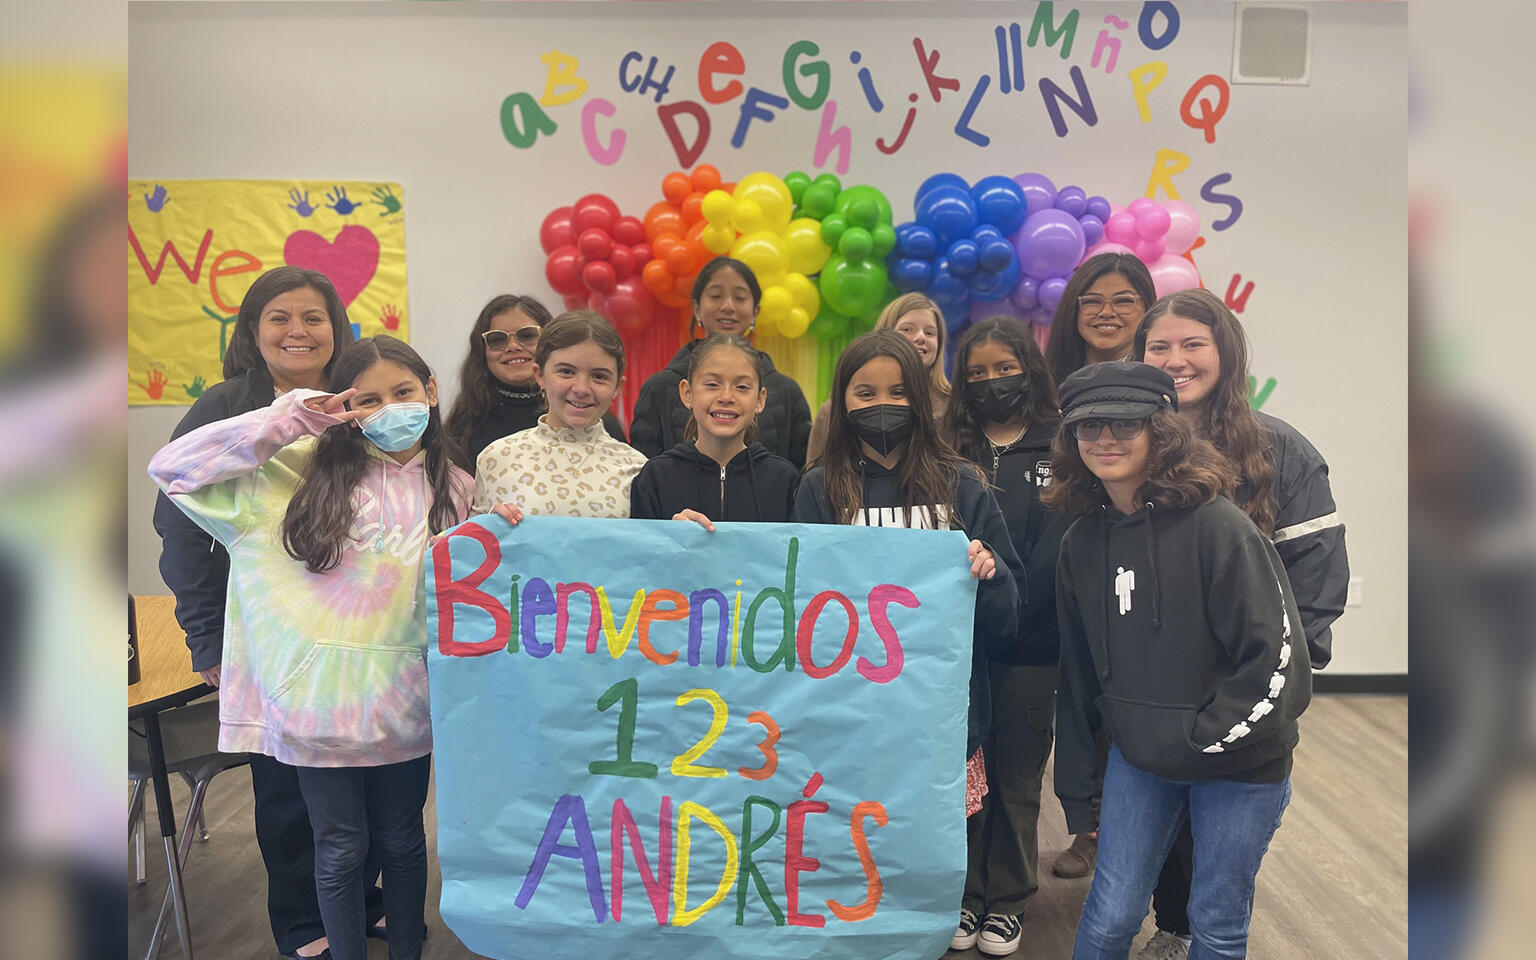 Our PALs Students welcoming 1, 2, 3 Andrés